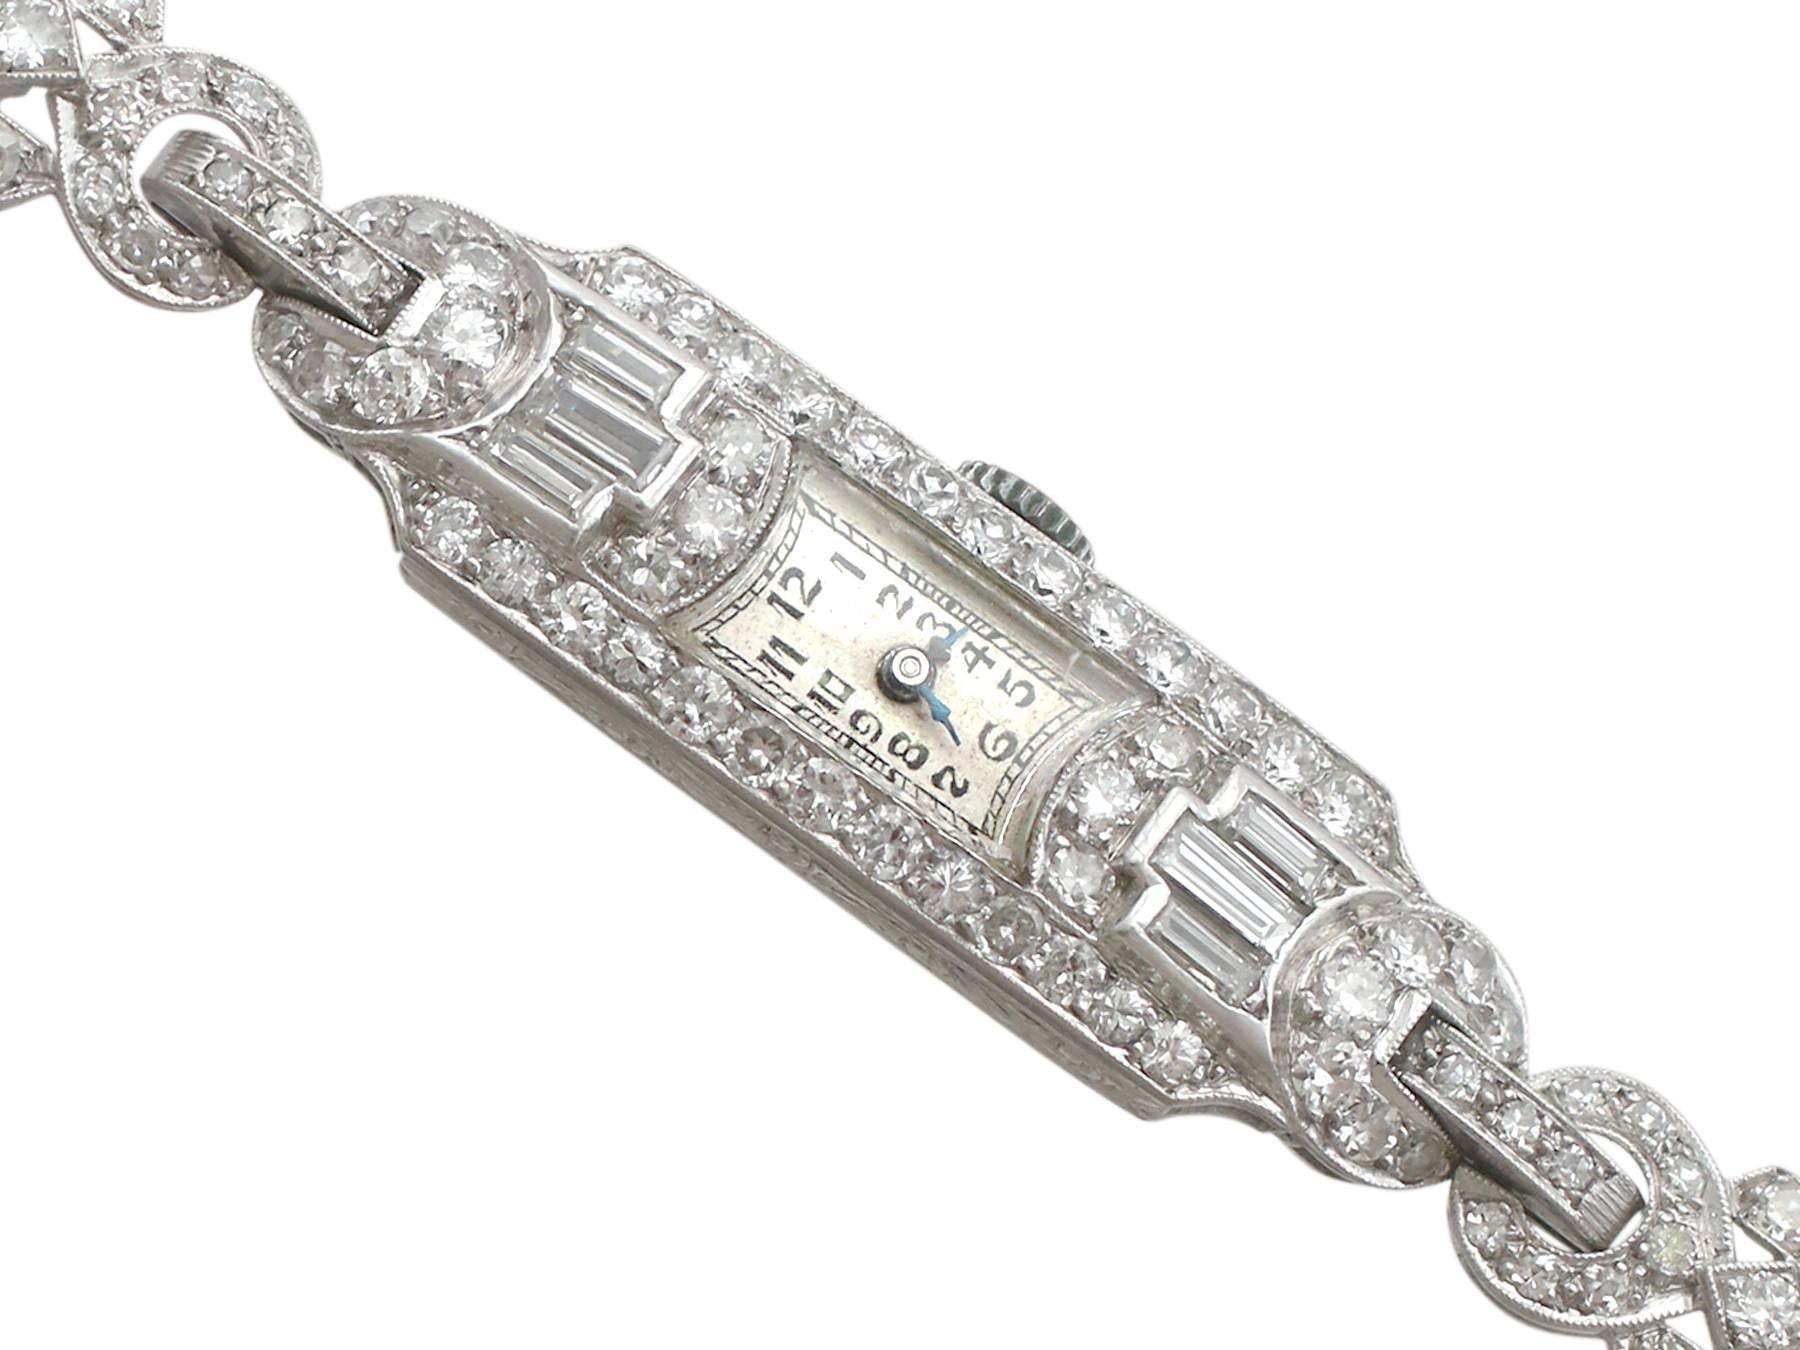 A stunning, fine and impressive antique cocktail watch with 4.26 carats (total) diamonds in platinum ; part of our diverse antique watch and diamond jewellery collections. 

This stunning diamond cocktail watch has been crafted in platinum.

This